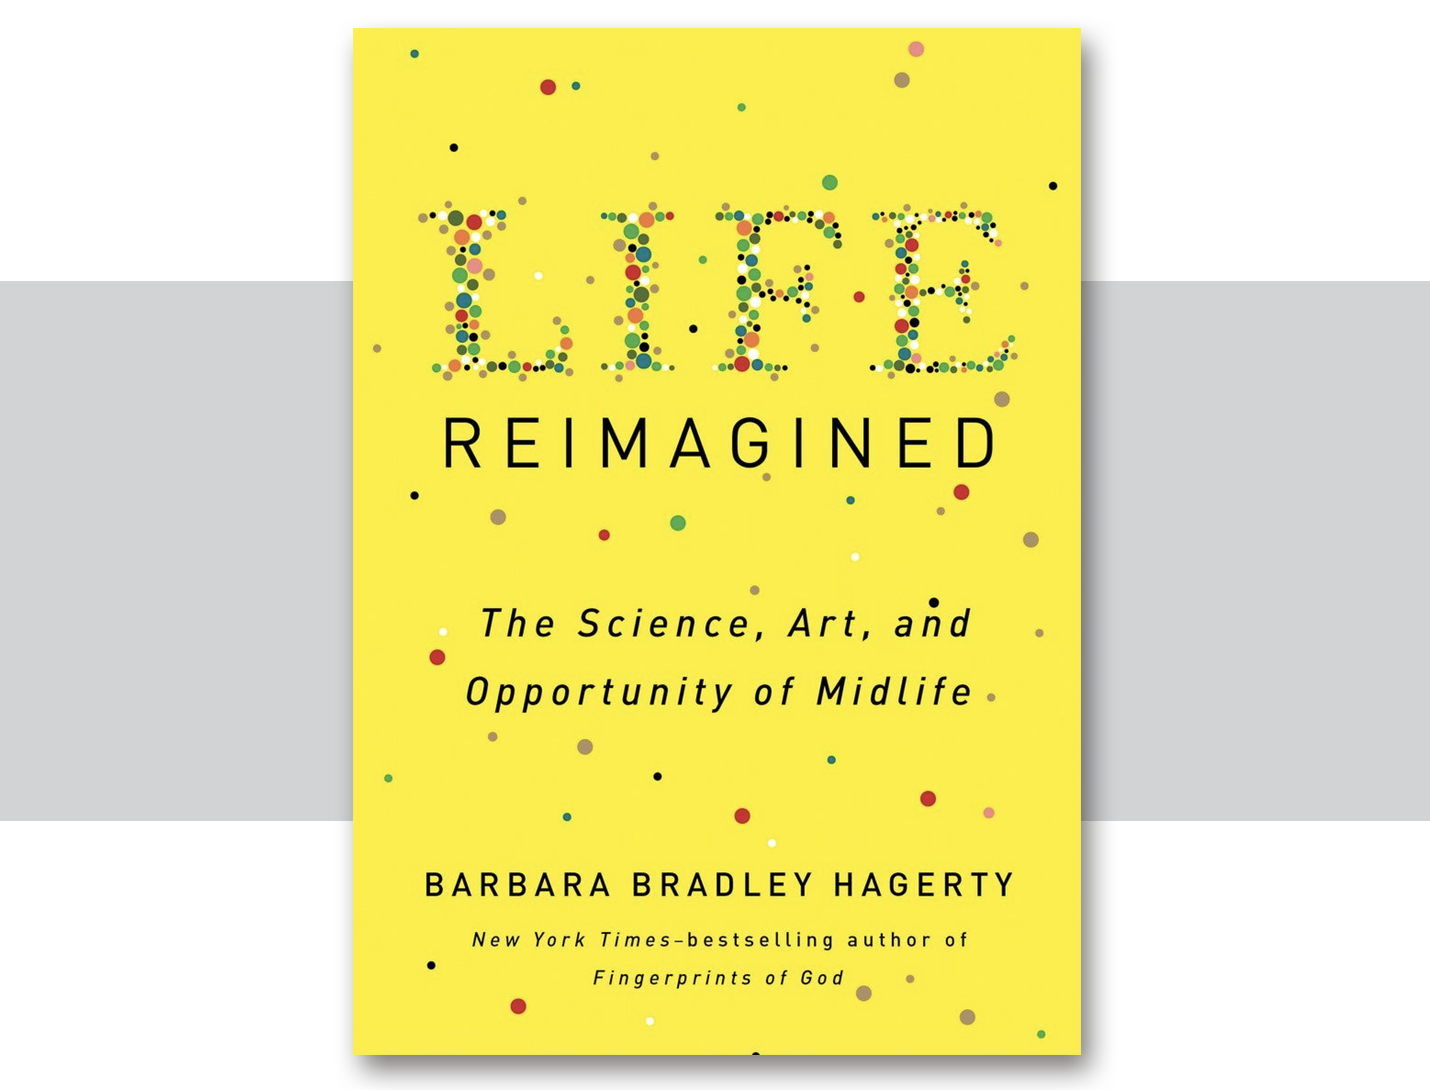 Life Reimagined by Barbara Bradley Hagerty